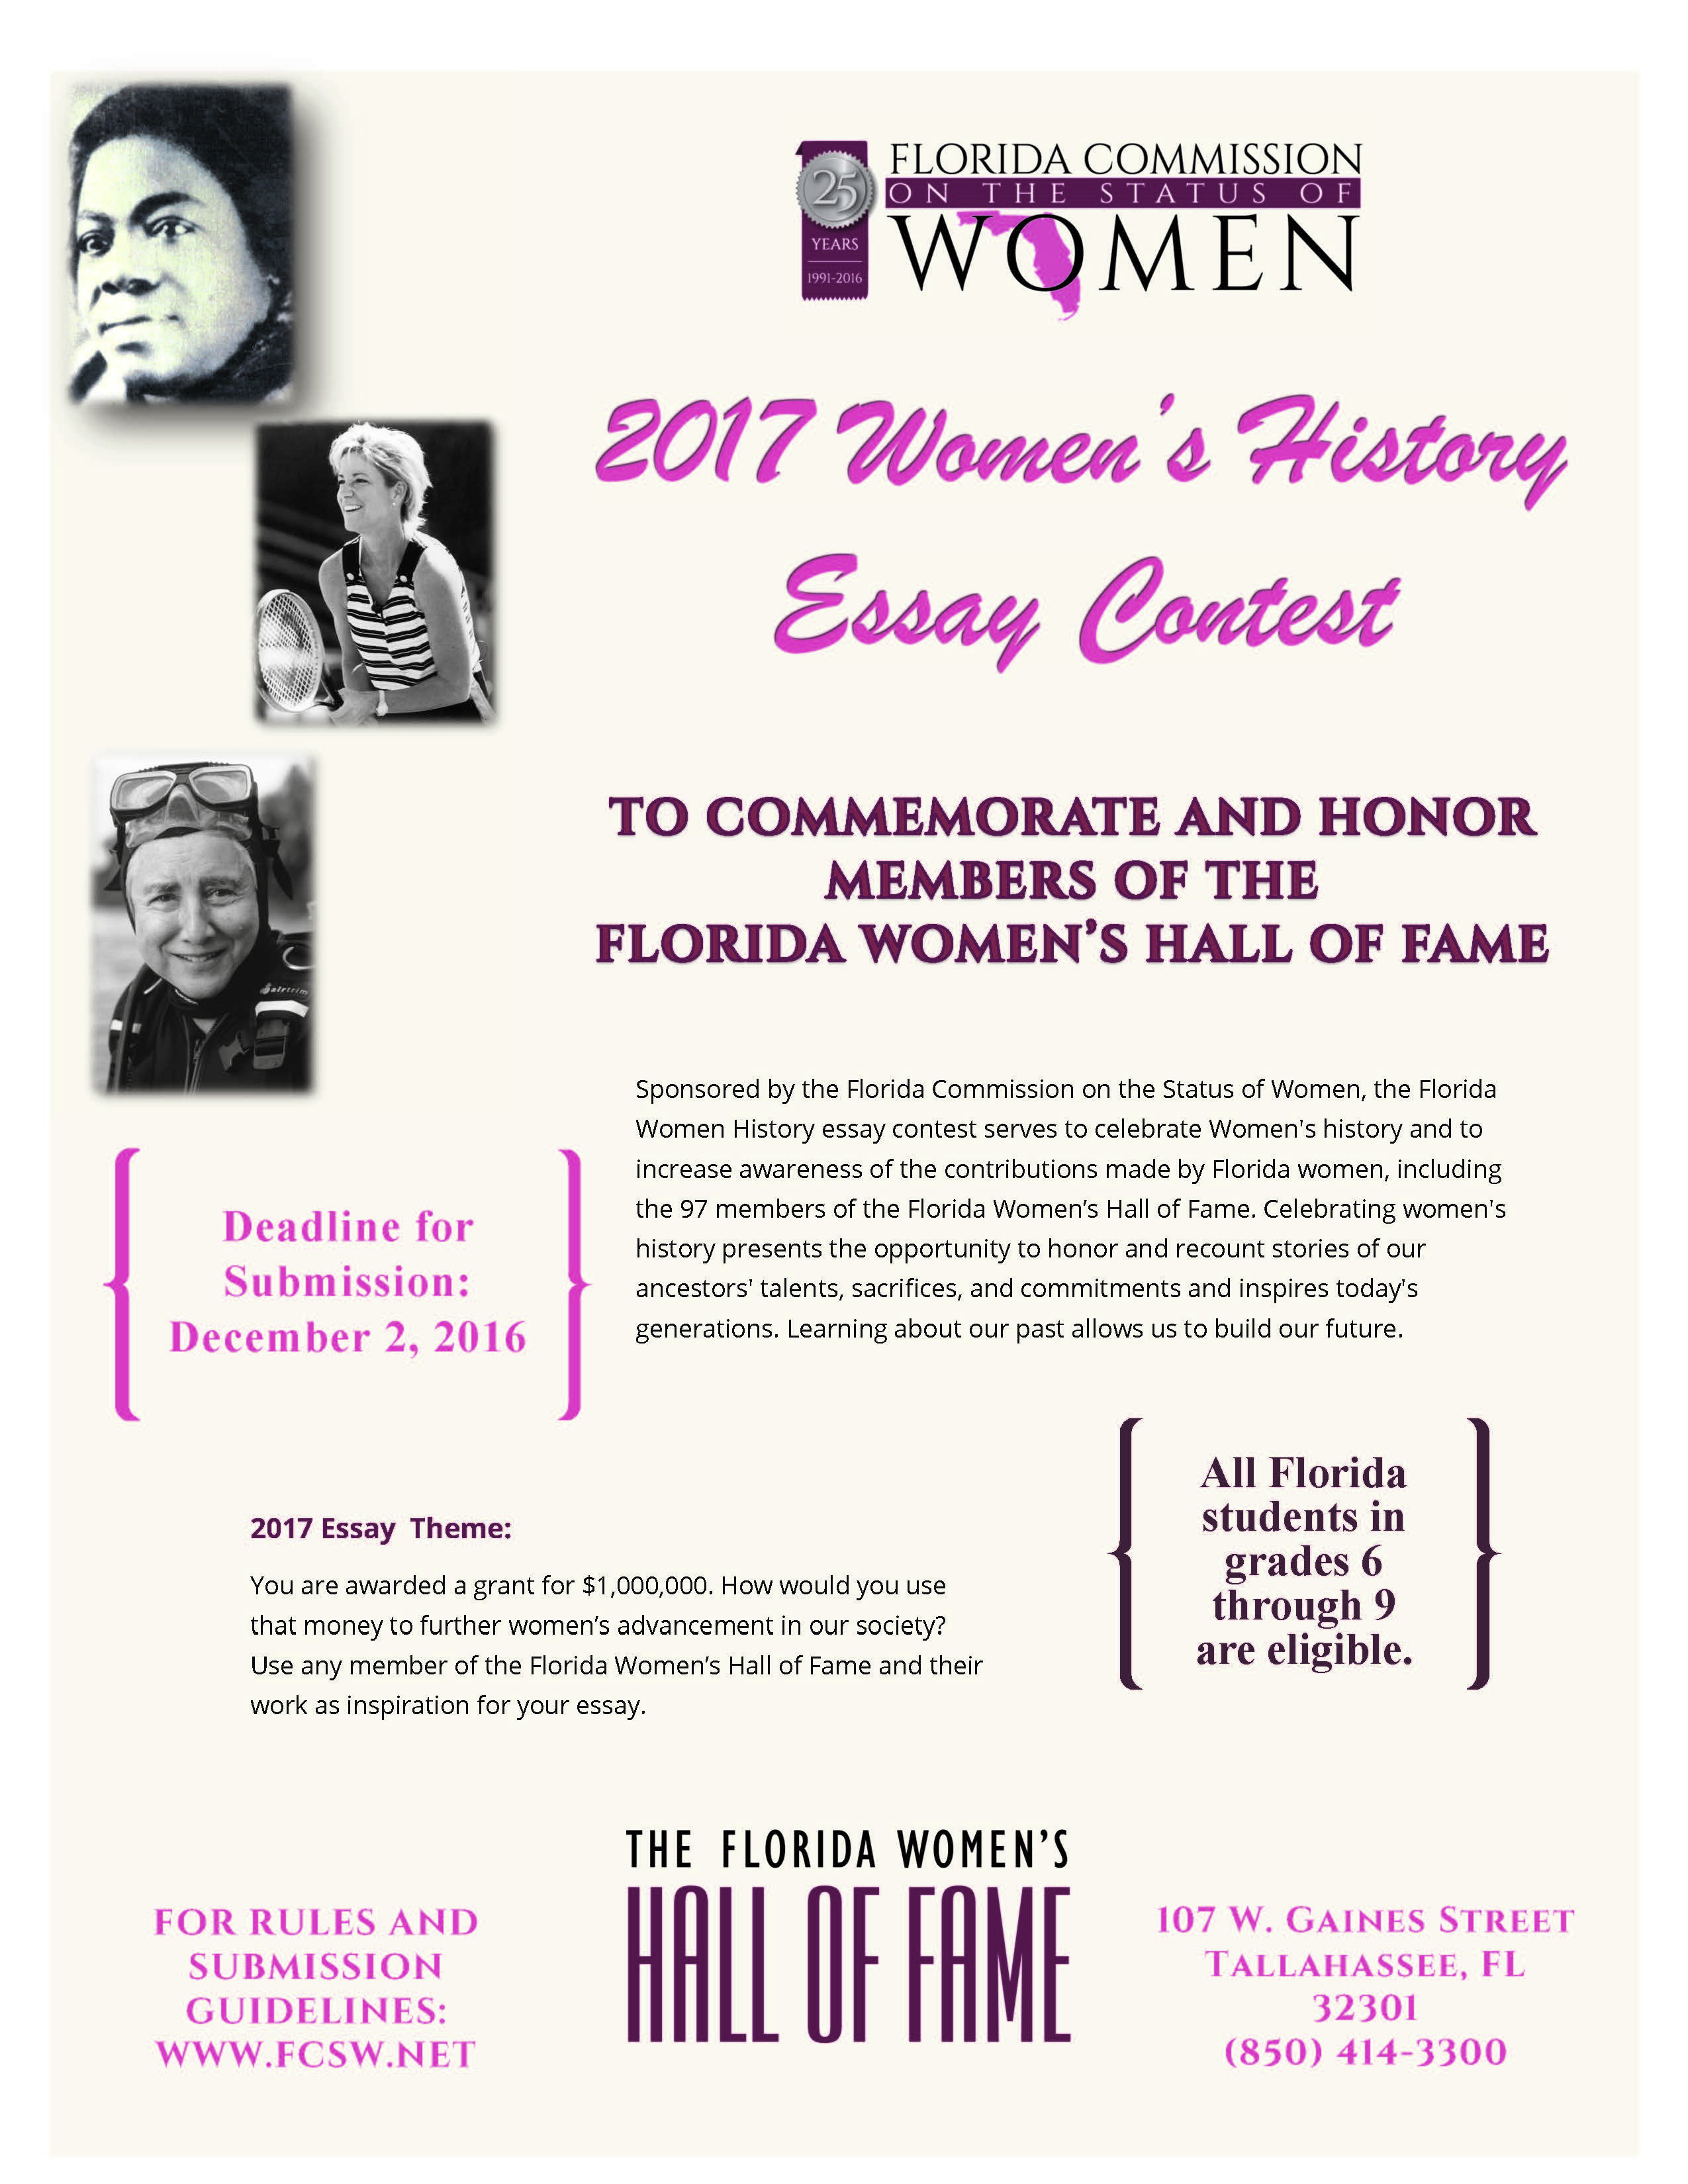 Black history month essay contest rules